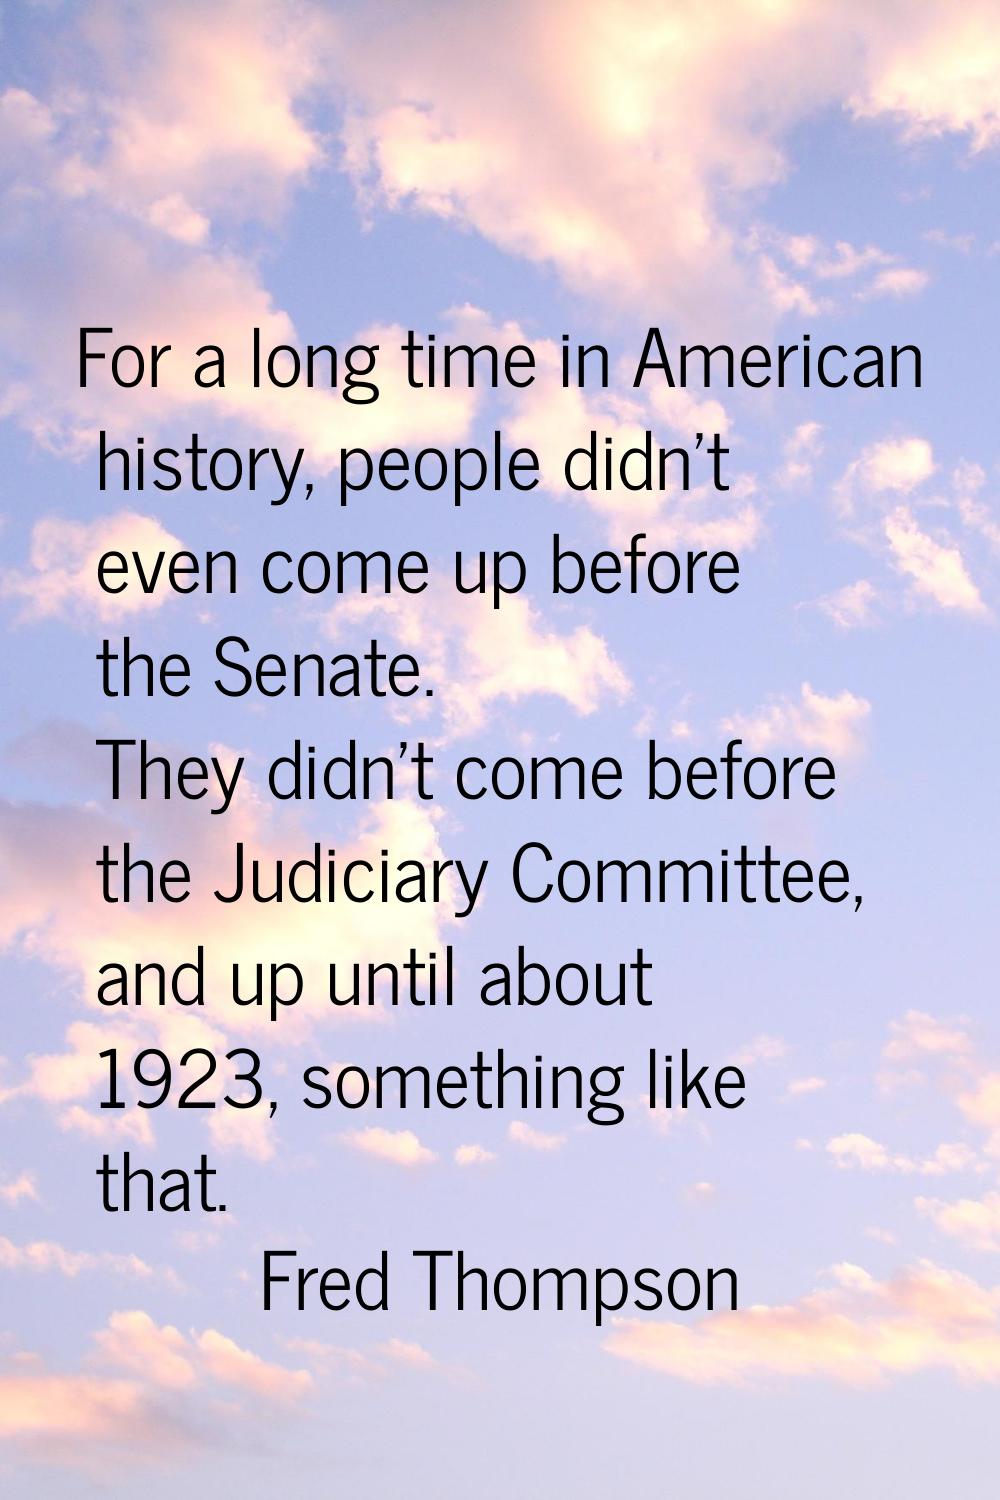 For a long time in American history, people didn't even come up before the Senate. They didn't come